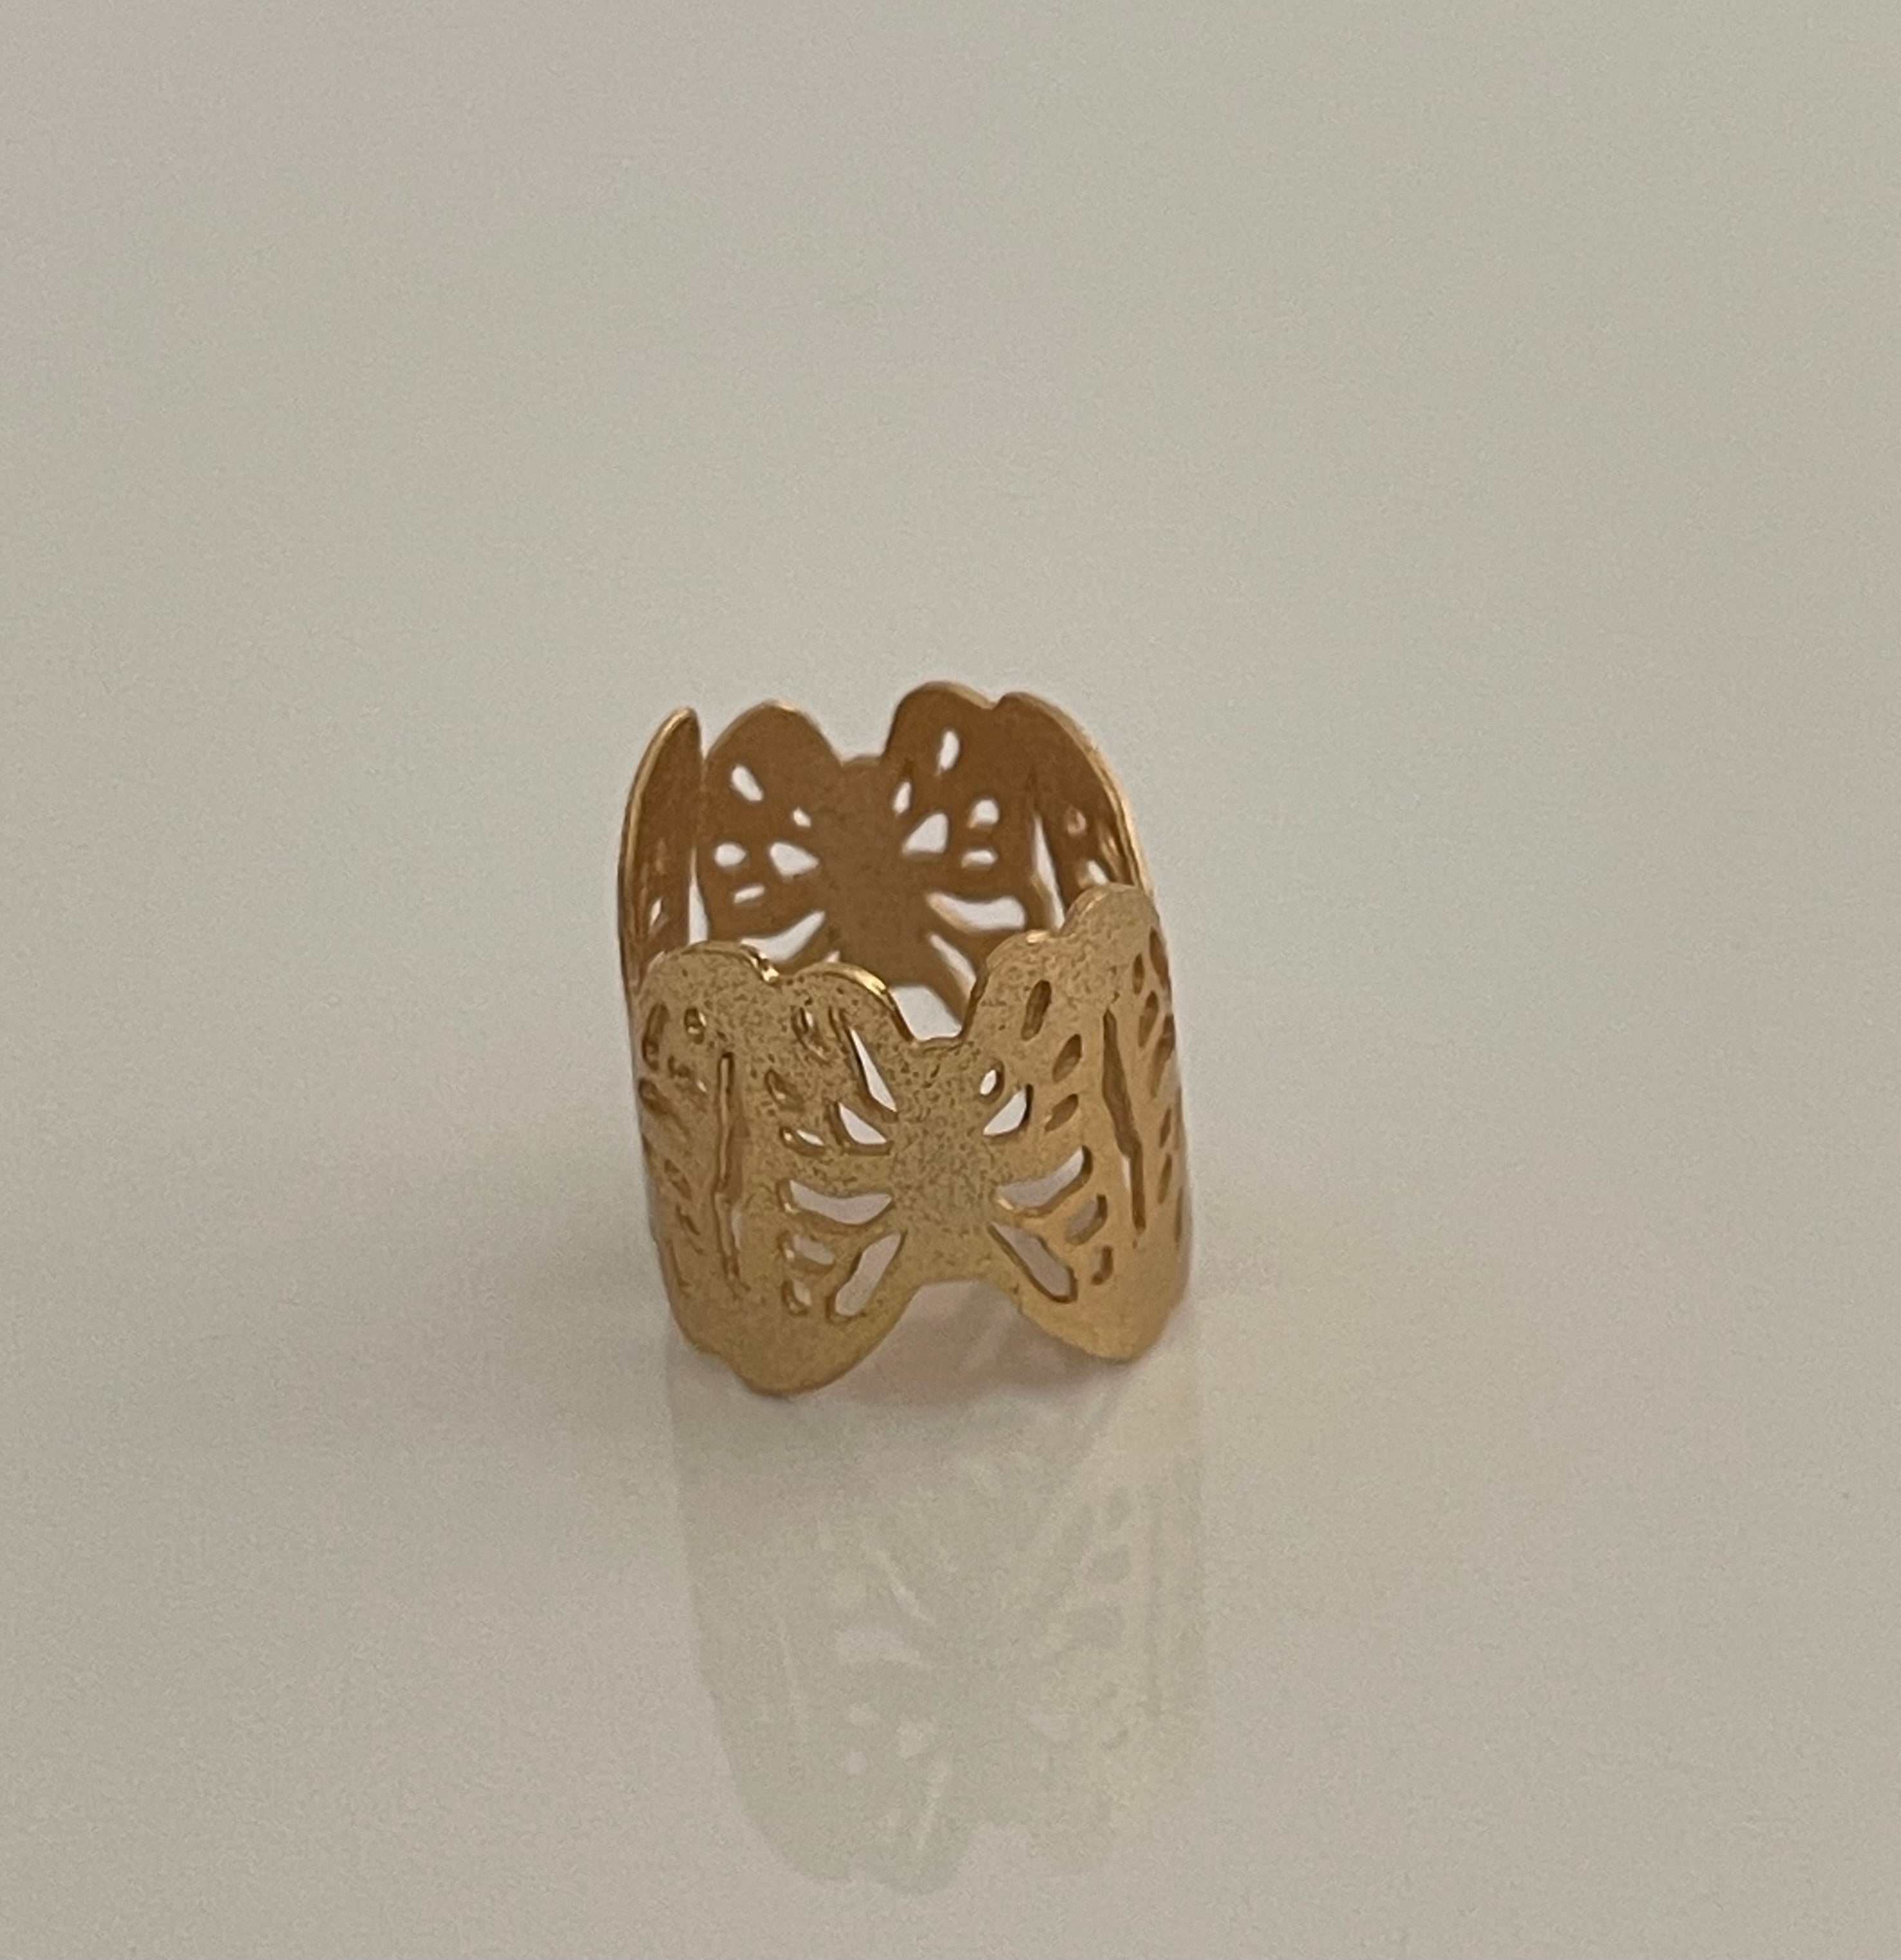 Adjustable butterfly ring with 24k gold plating